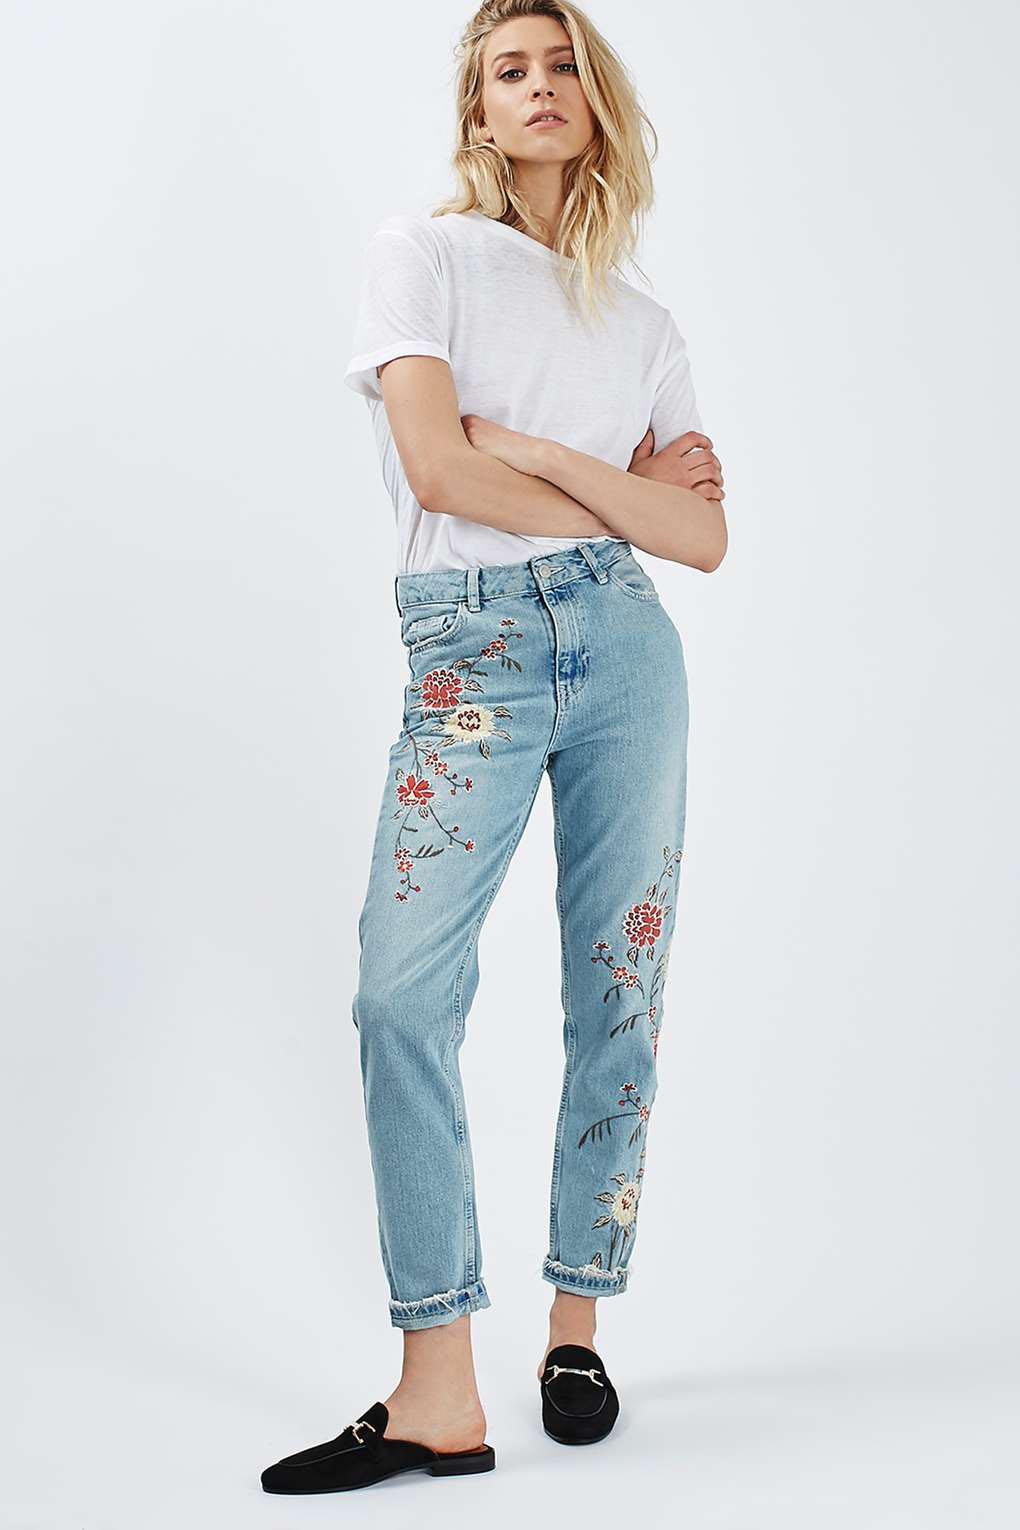 embroidered-jeans-top-ten-color